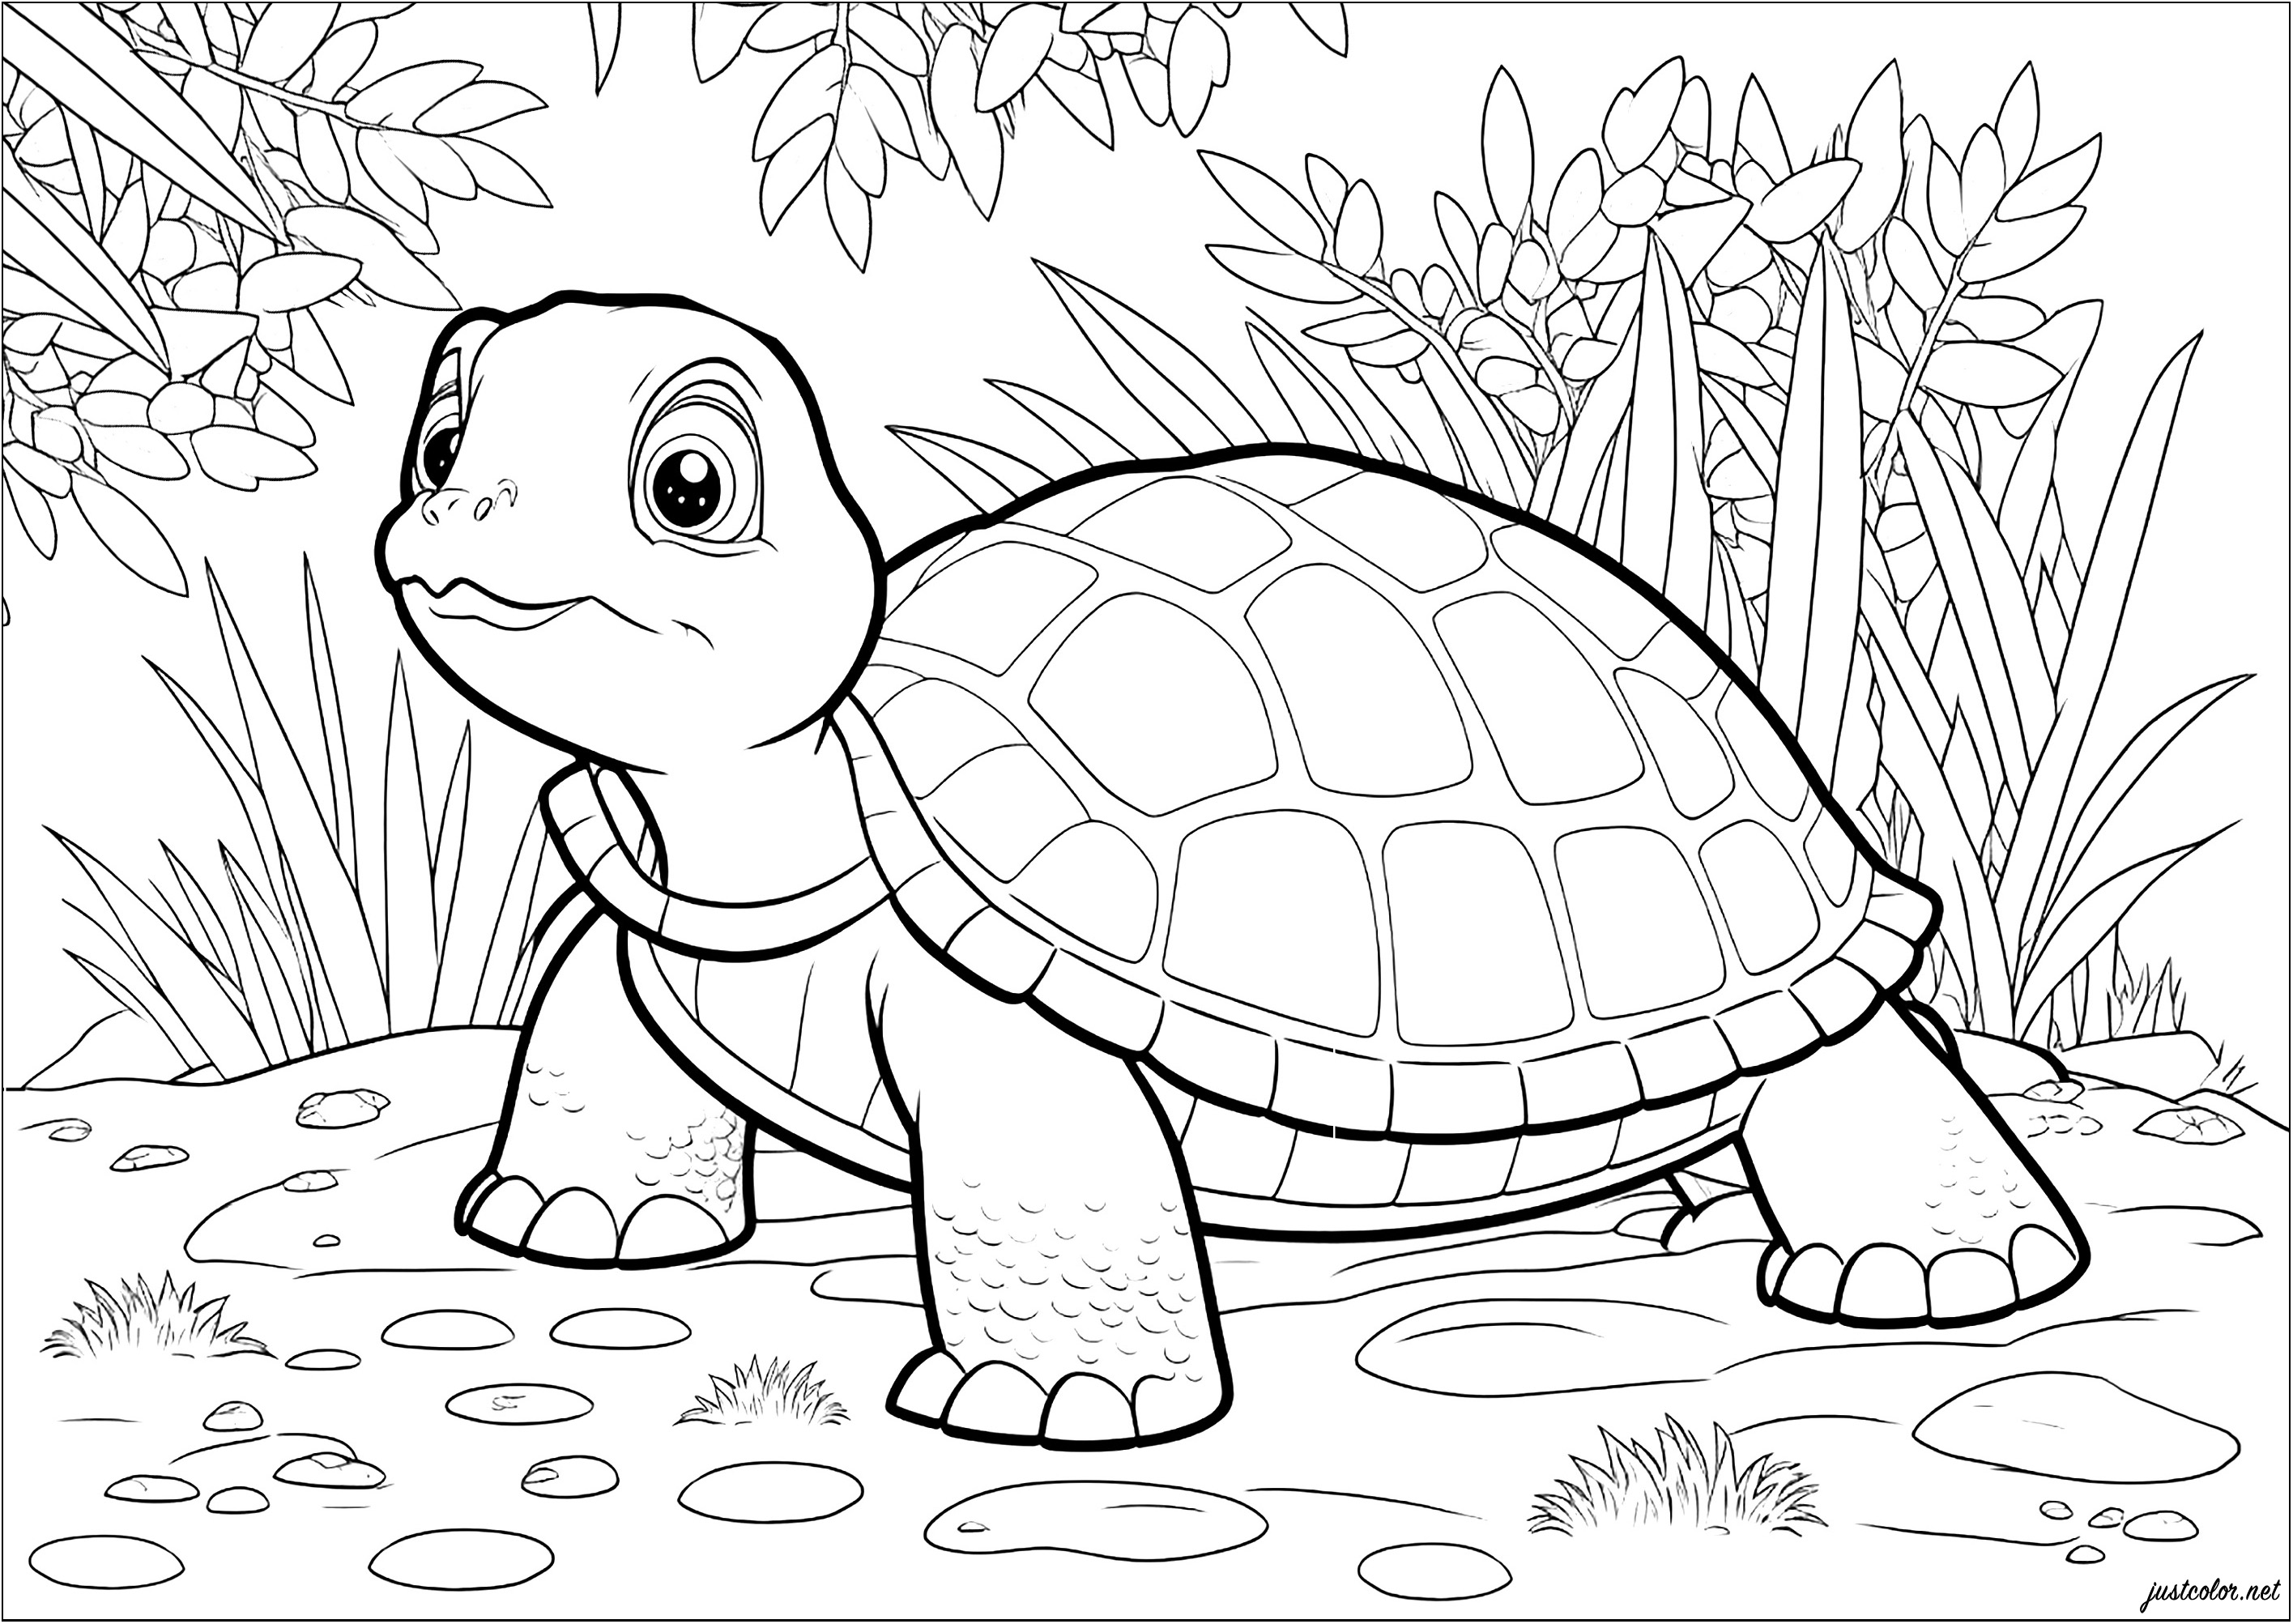 A cool coloring page with a turtle and a lot of leaves behind. Join the slow and steady tortoise on its adventures in this fun coloring page.